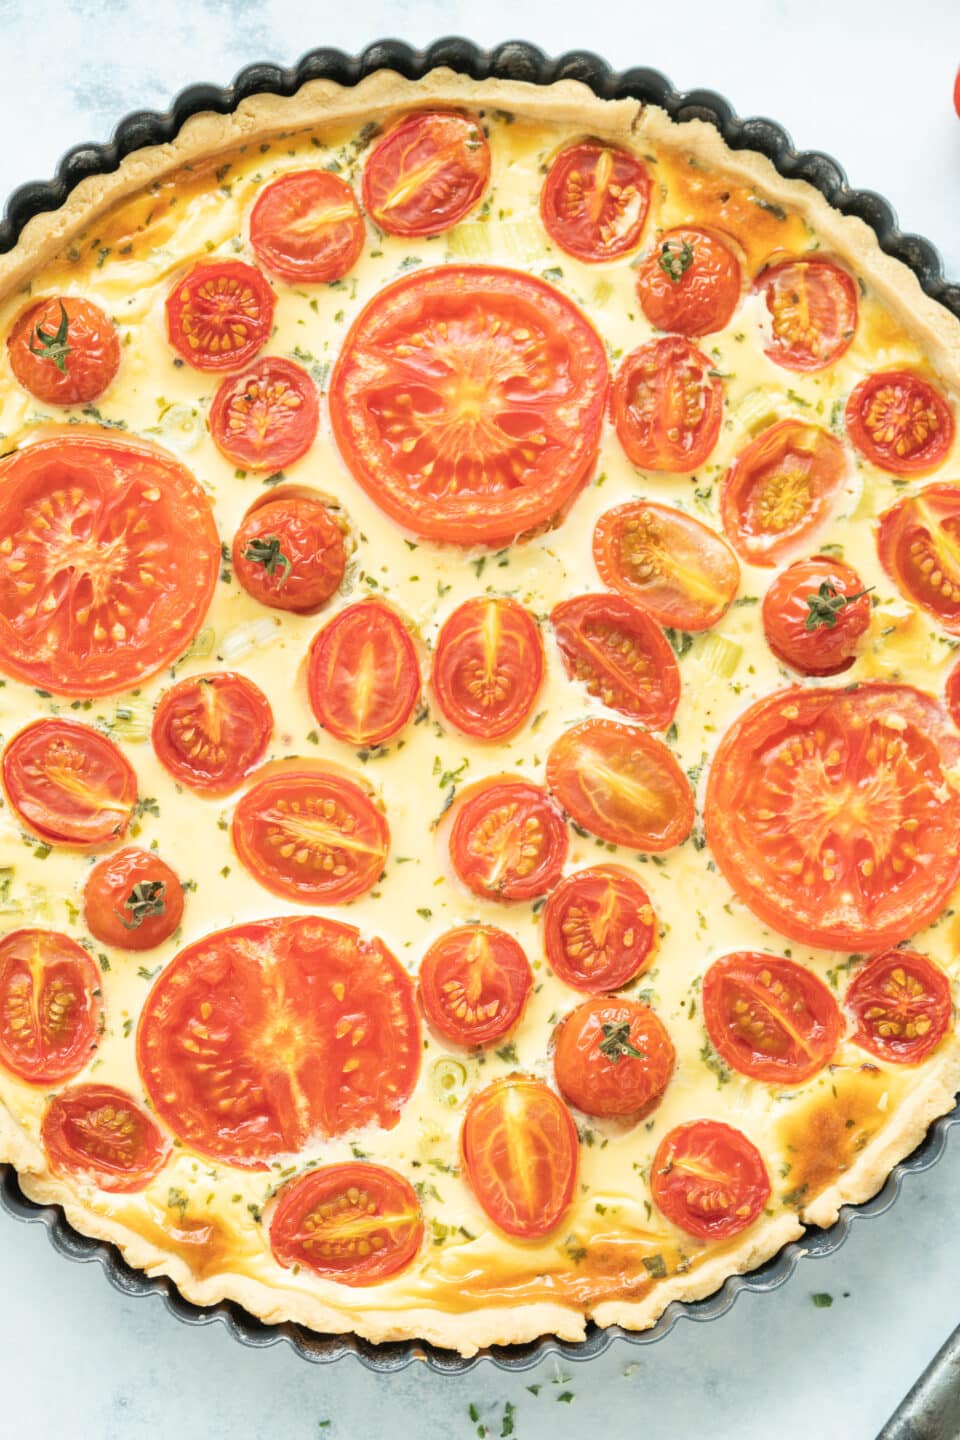 Goat cheese quiche with cherry tomatoes